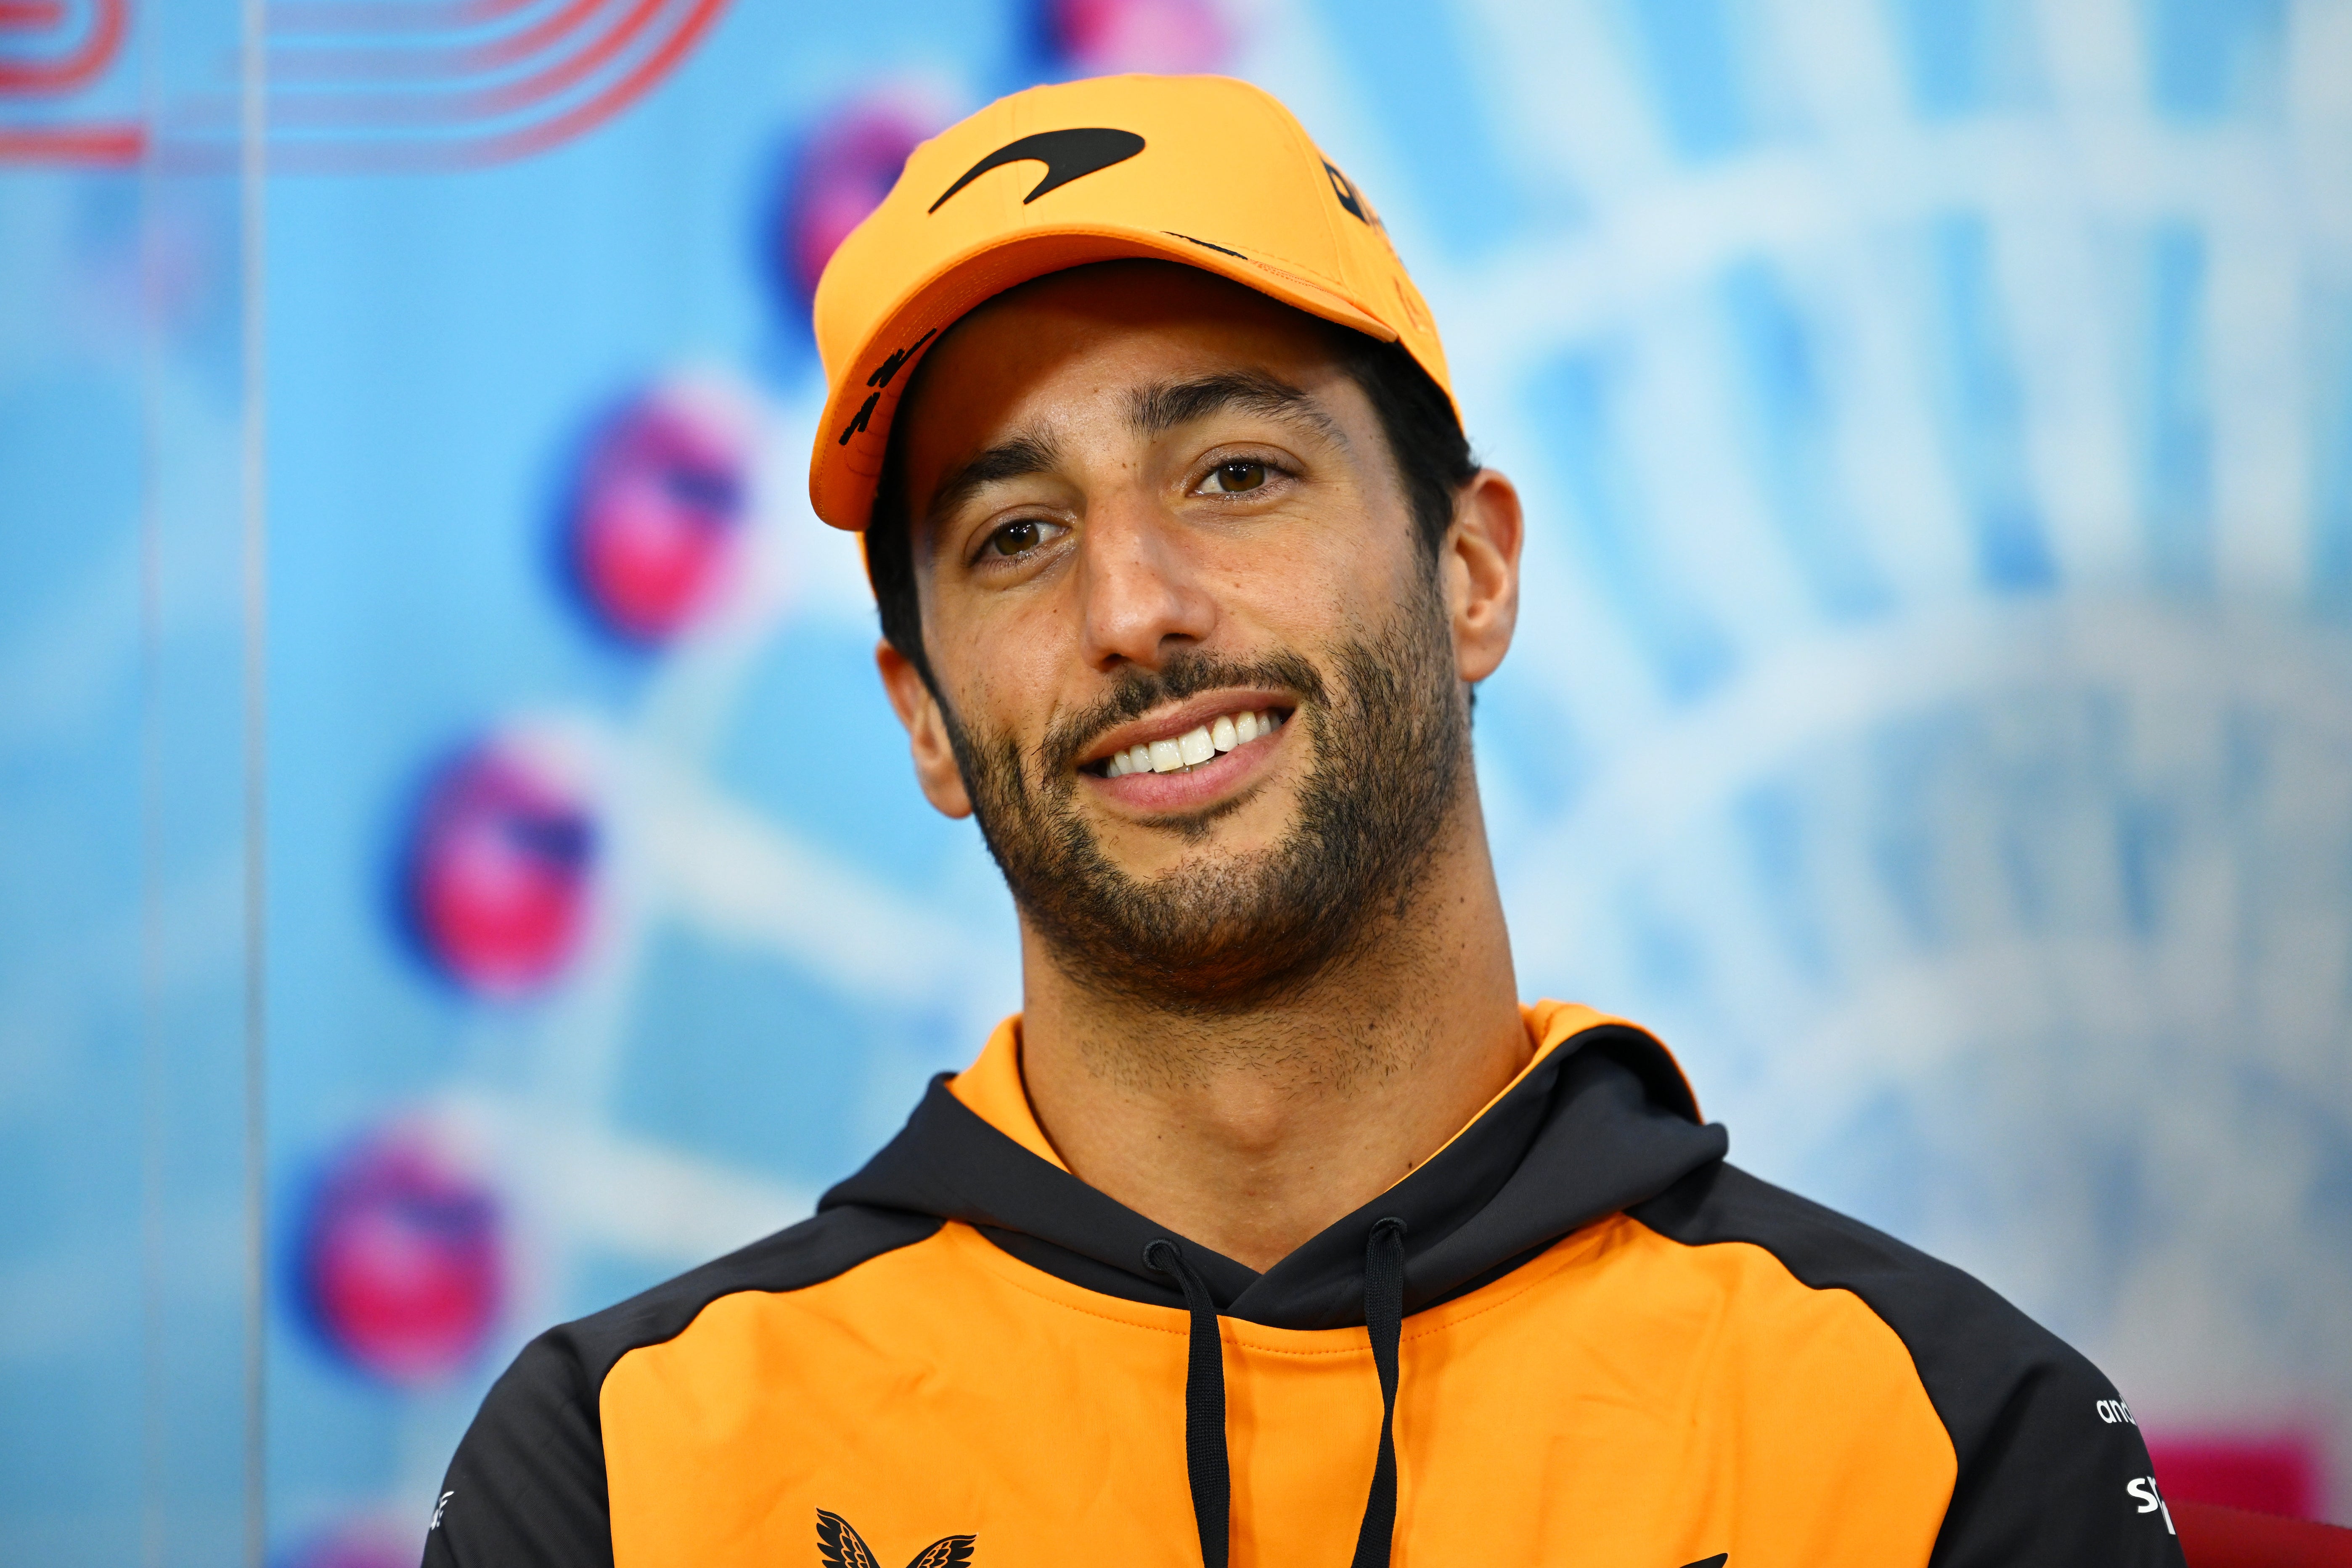 Daniel Ricciardo has confirmed he is not expecting to be on the Formula 1 grid next year